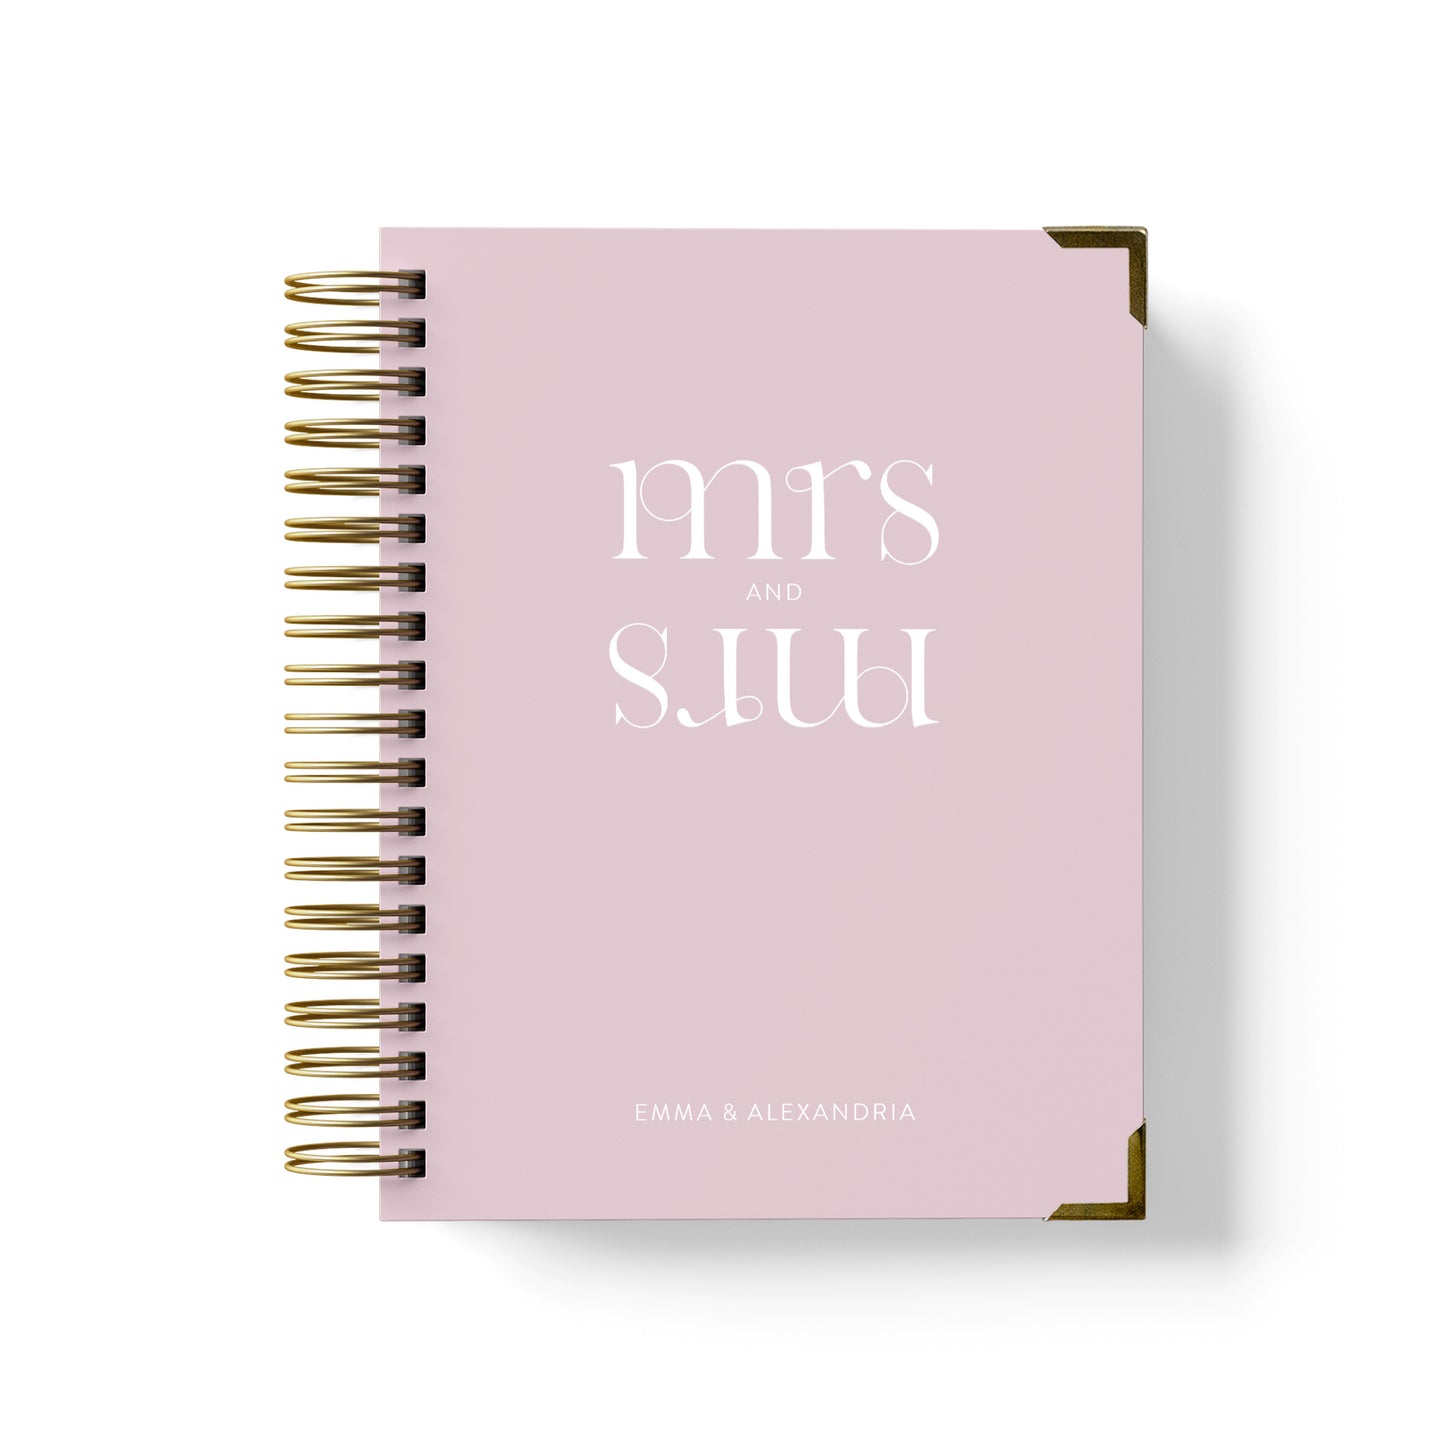 Our LGBT wedding planner books are all-inclusive and gender-neutral, shown in a future mrs and mrs design